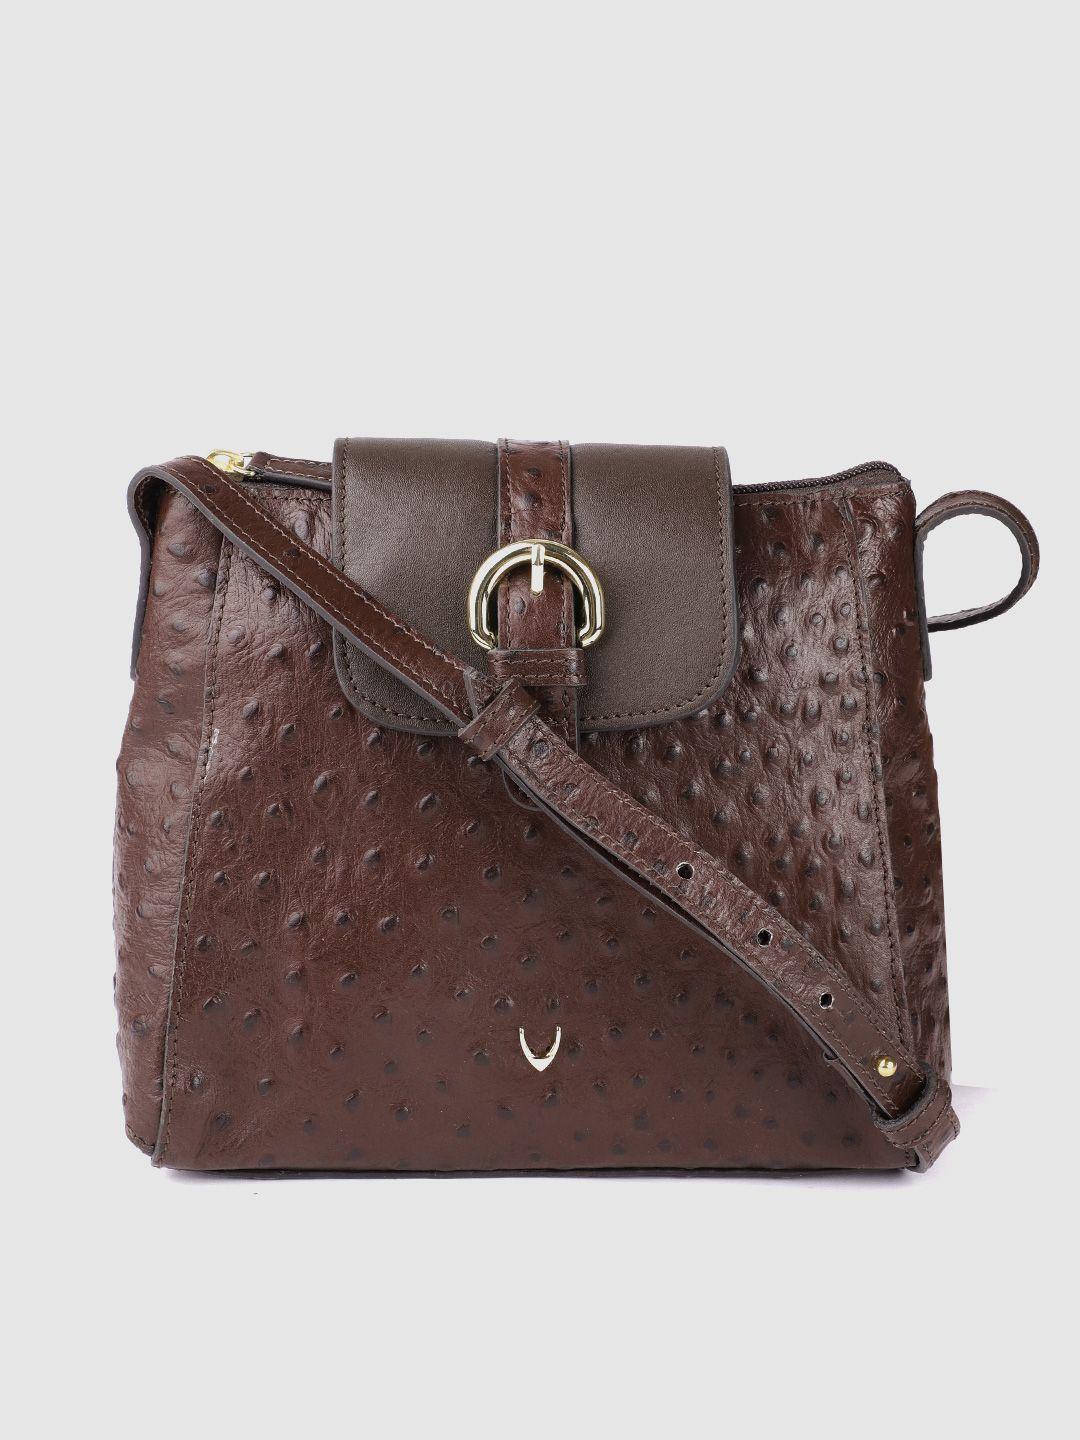 hidesign coffee brown handcrafted croc textured leather structured sling bag